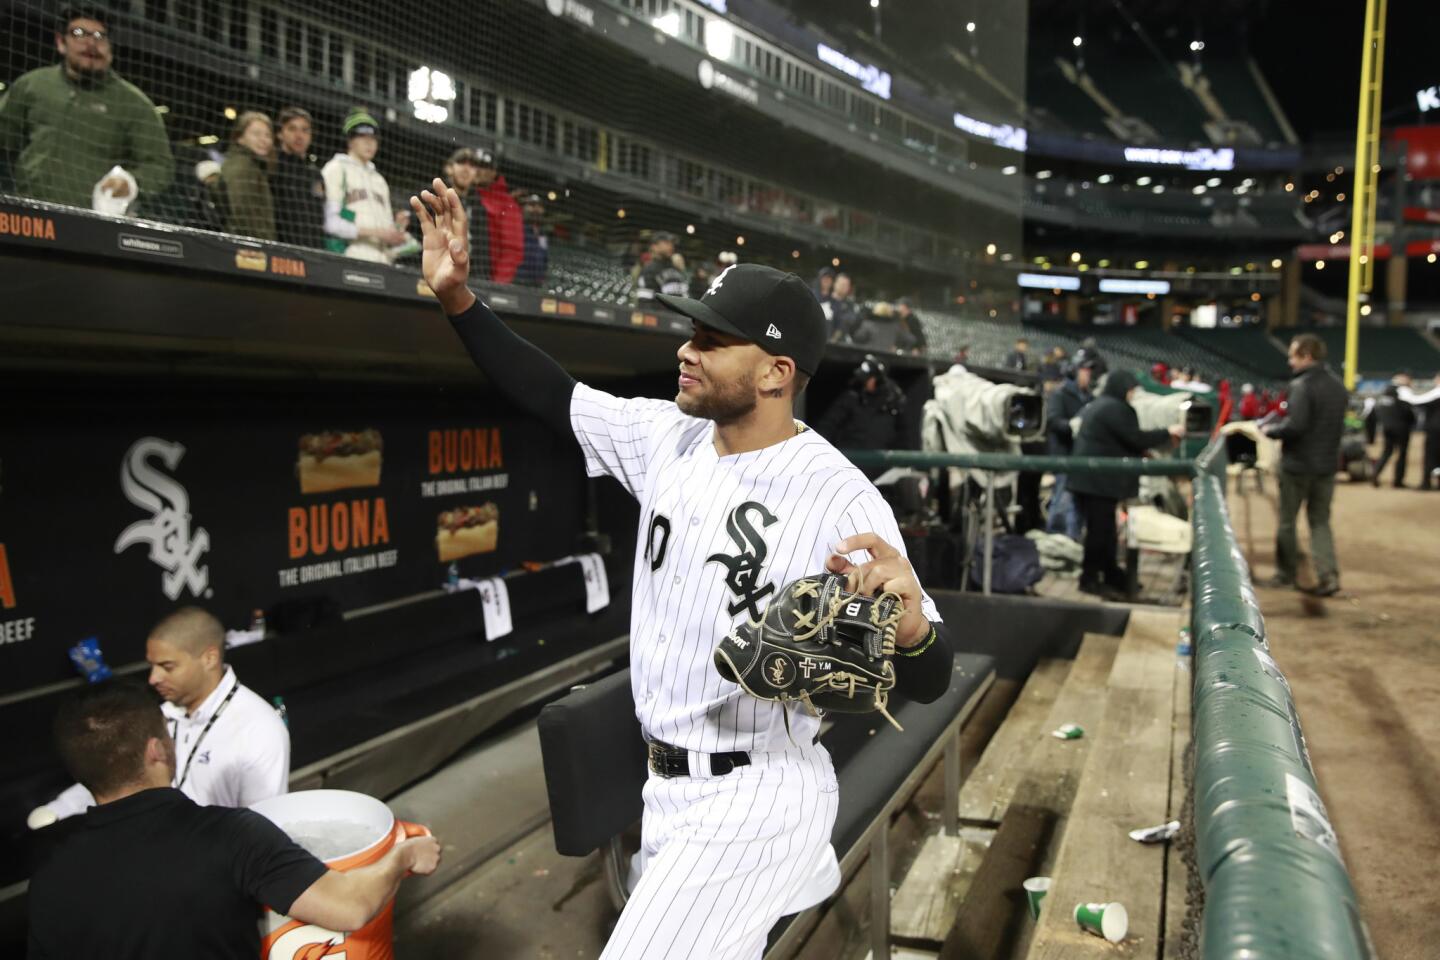 White Sox second baseman Yoan Moncada (10) waves to the fans behind the dugout as he heads for the clubhouse following his team's 10-4 win over the Mariners at Guaranteed Rate Field on Monday, April 23, 2018.